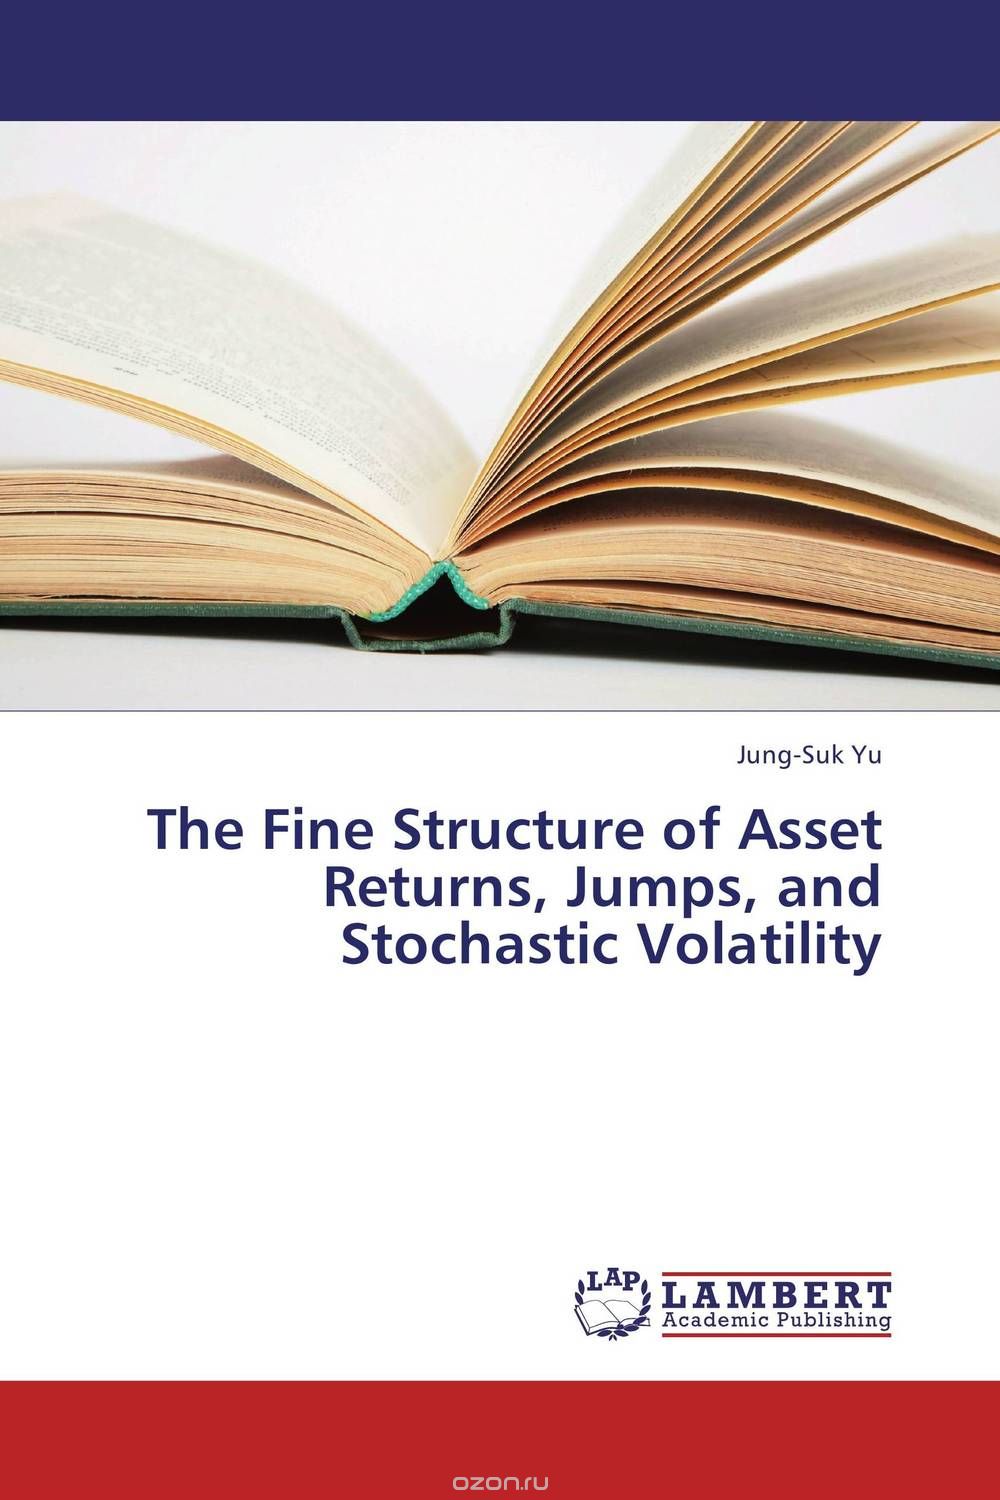 The Fine Structure of Asset Returns, Jumps, and Stochastic Volatility